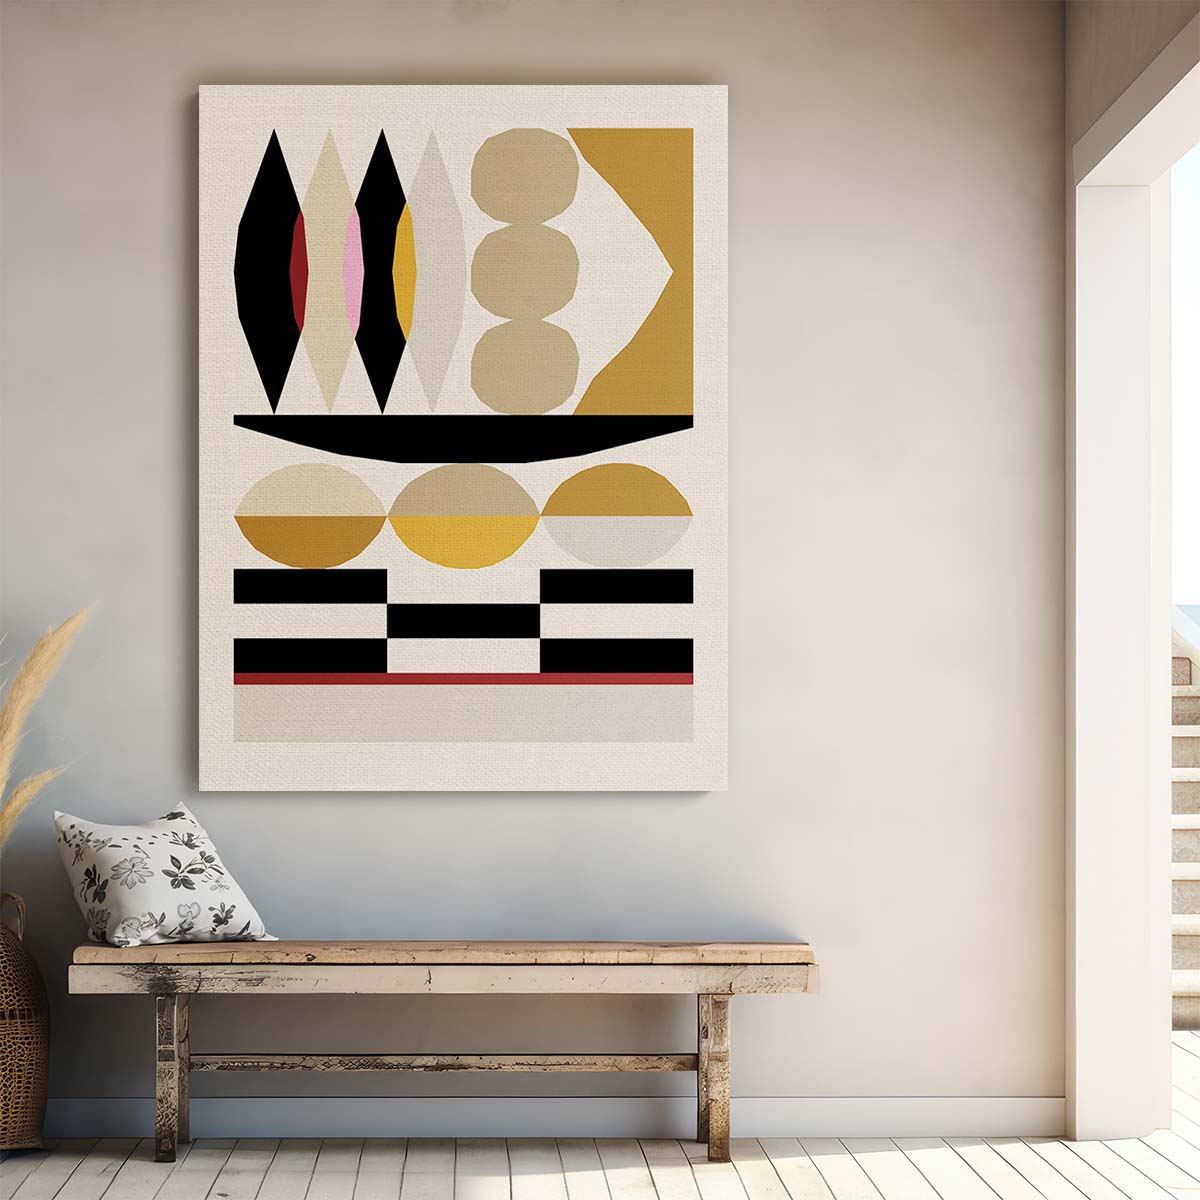 NKTN Boho Abstract Geometric Shapes Illustration on White Background by Luxuriance Designs, made in USA